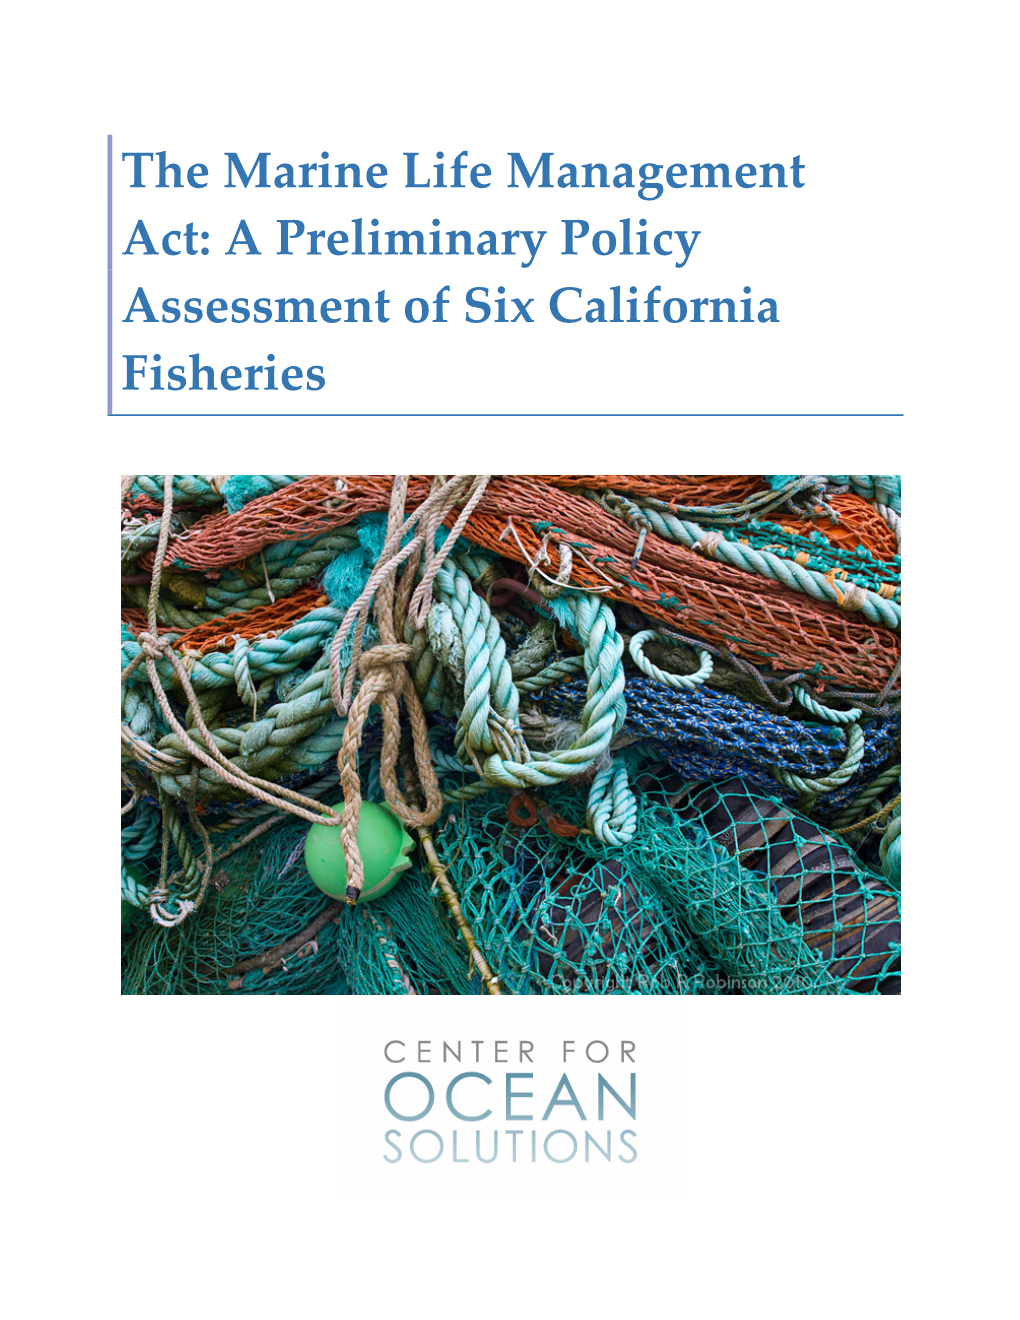 The Marine Life Management Act: a Preliminary Policy Assessment of Six California Fisheries